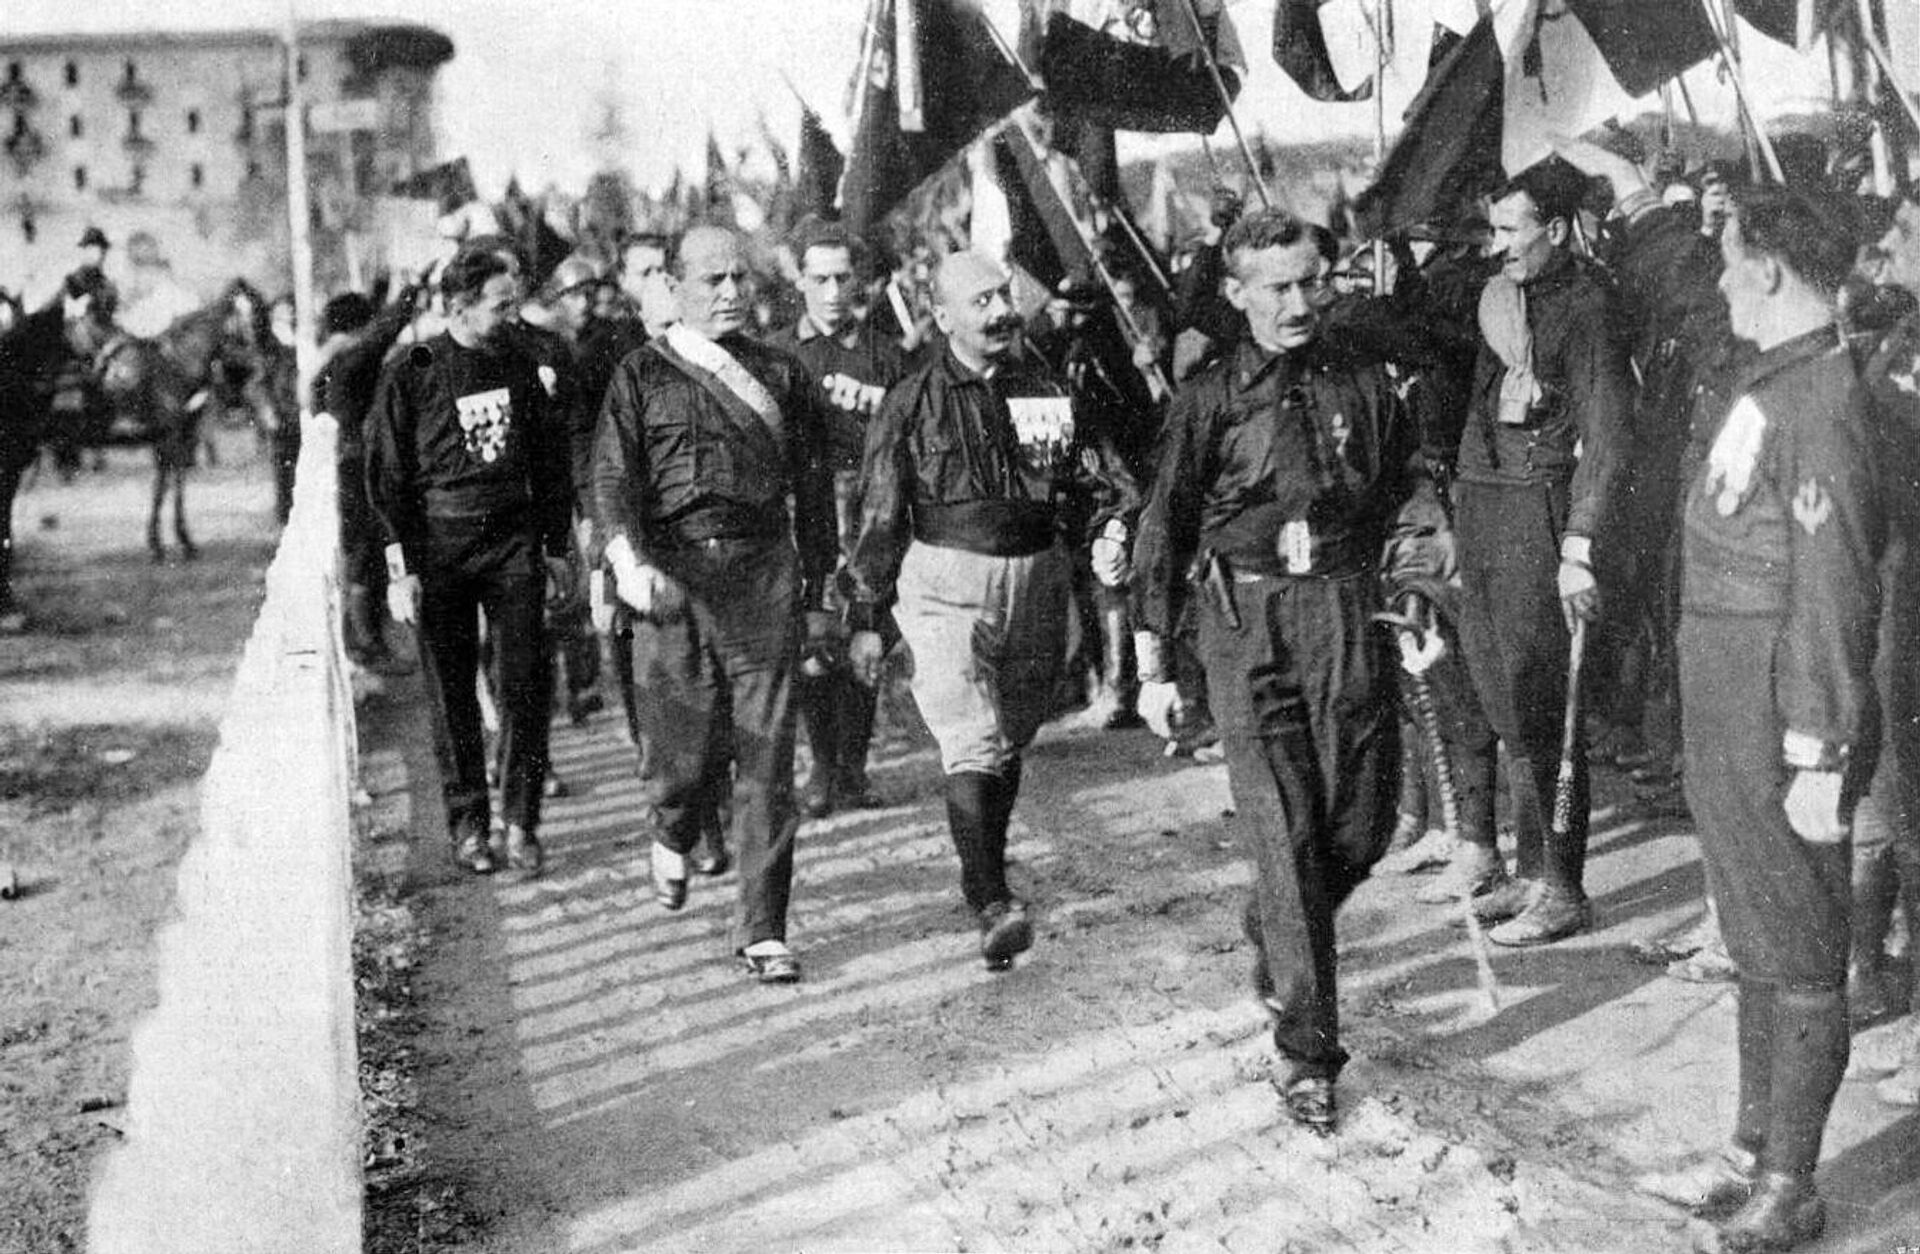 A staged photo of the March on Rome, October 24, 1922. From left to right: Italo Balbo, Benito Mussolini, Cesare Maria de Vecchi and Michele Bianchi. The three men accompanying Mussolini were three of the four Quadrumvirs he dispatched to lead the coup in Rome. However, Mussolini did not participate and awaited the results in Milan. - Sputnik International, 1920, 28.10.2022